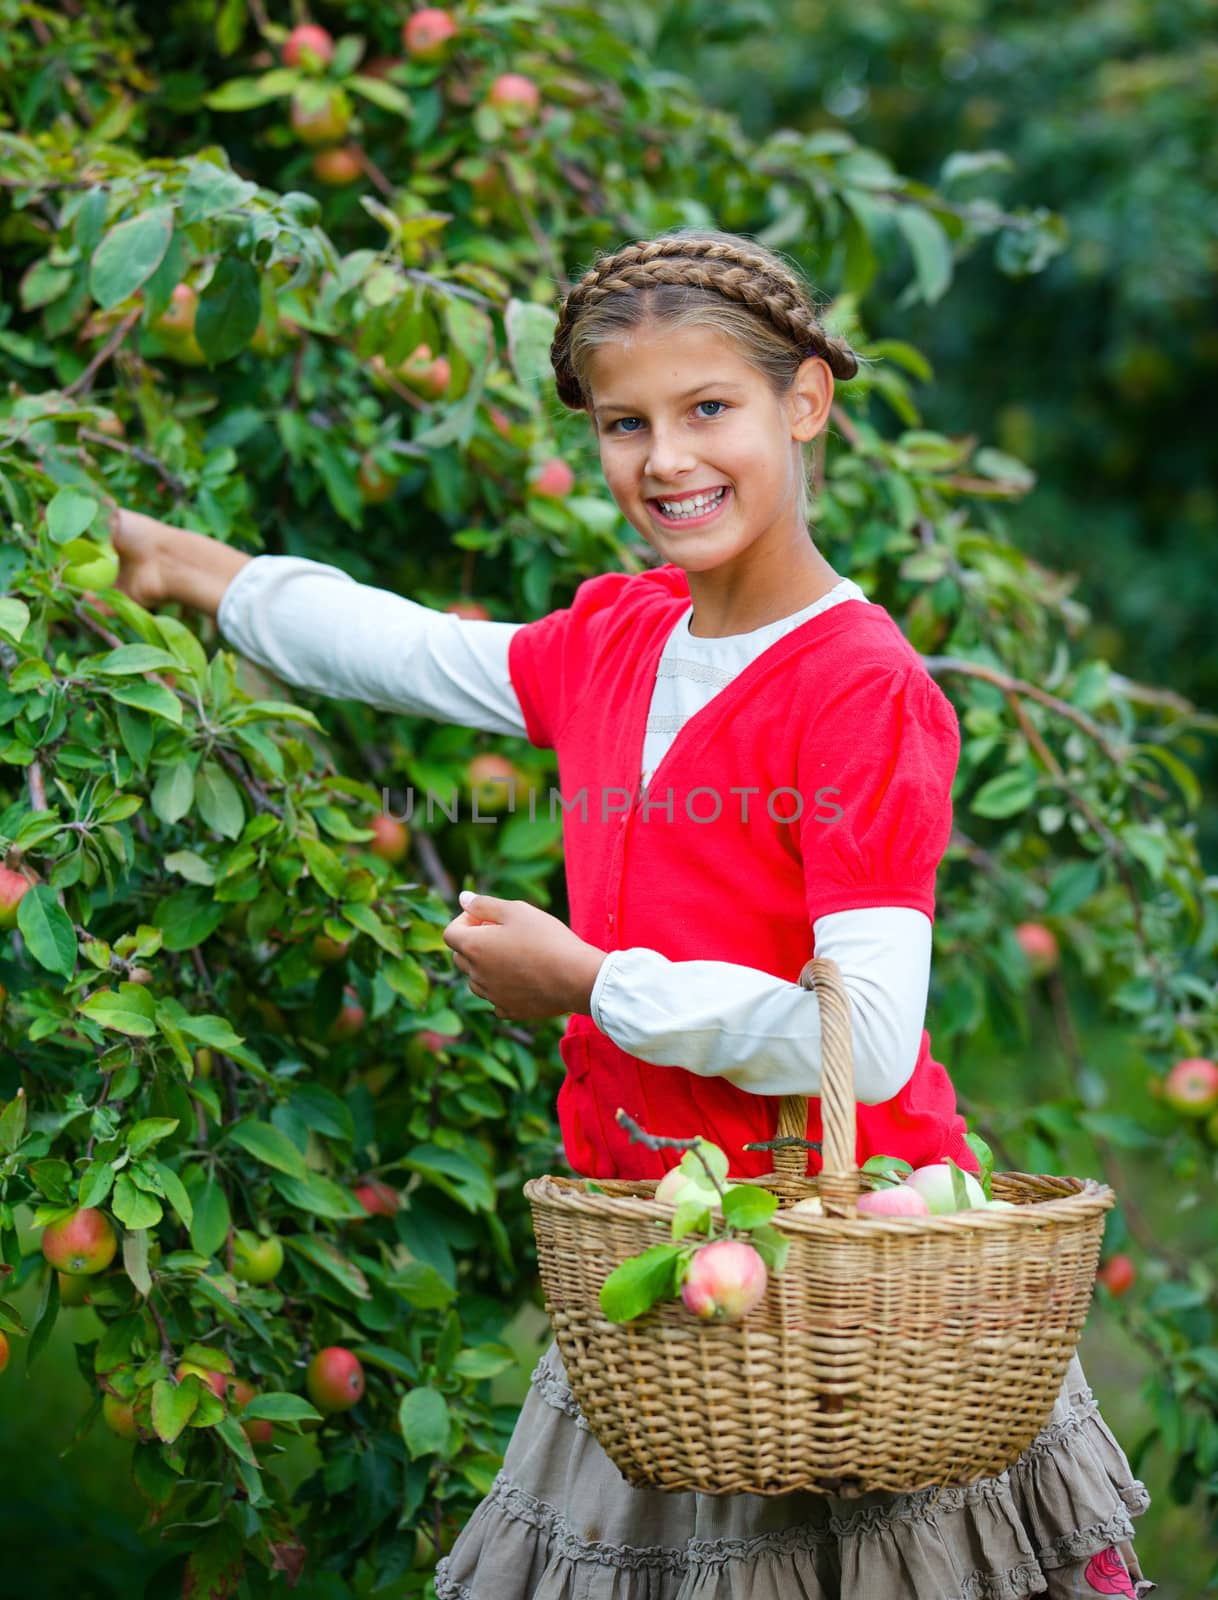 Cute girl in apple orchard by maxoliki